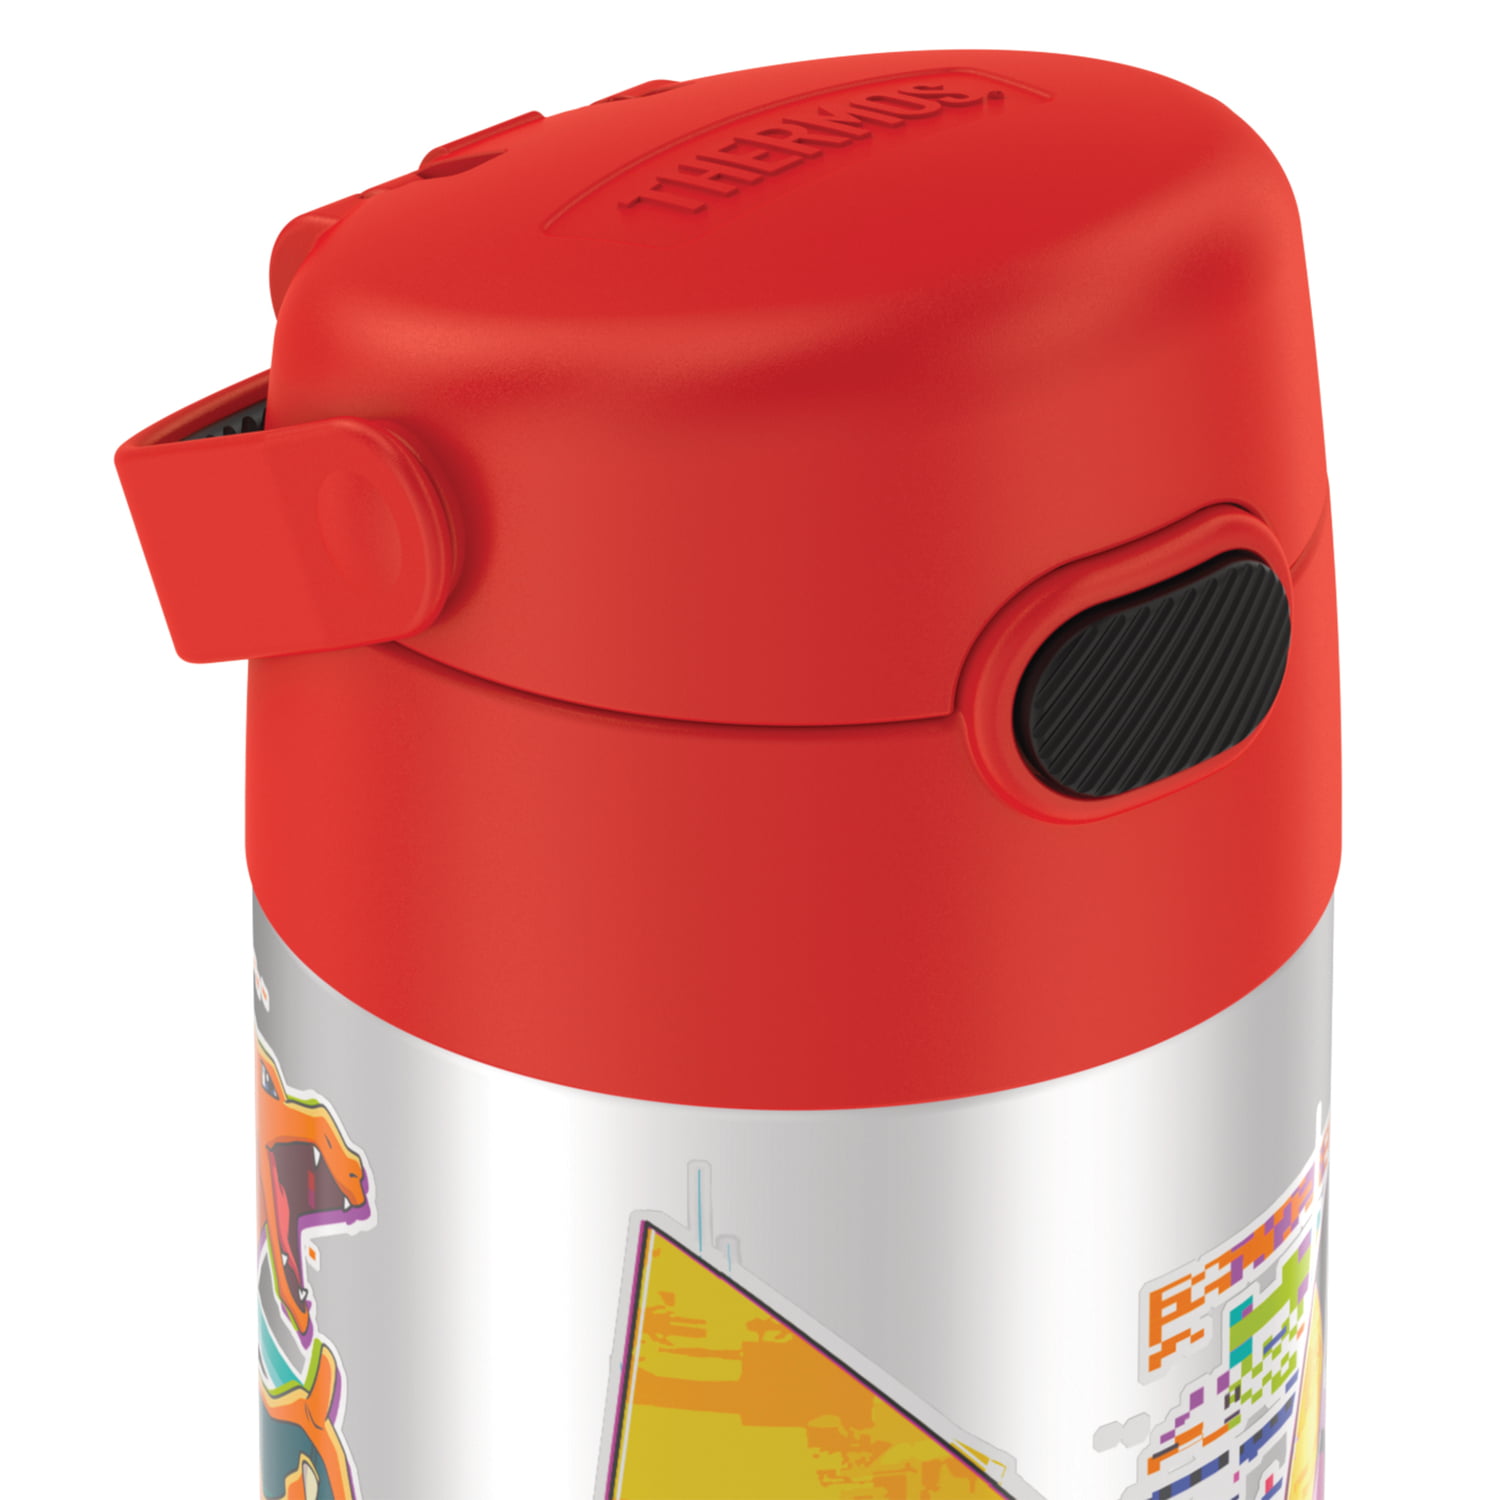 Thermos Funtainer 12-Oz Stainless Steel Vacuum Insulated Straw Bottle  (Pokemon) $11.91 (Reg. $19) - Lowest price in 30 days - Fabulessly Frugal